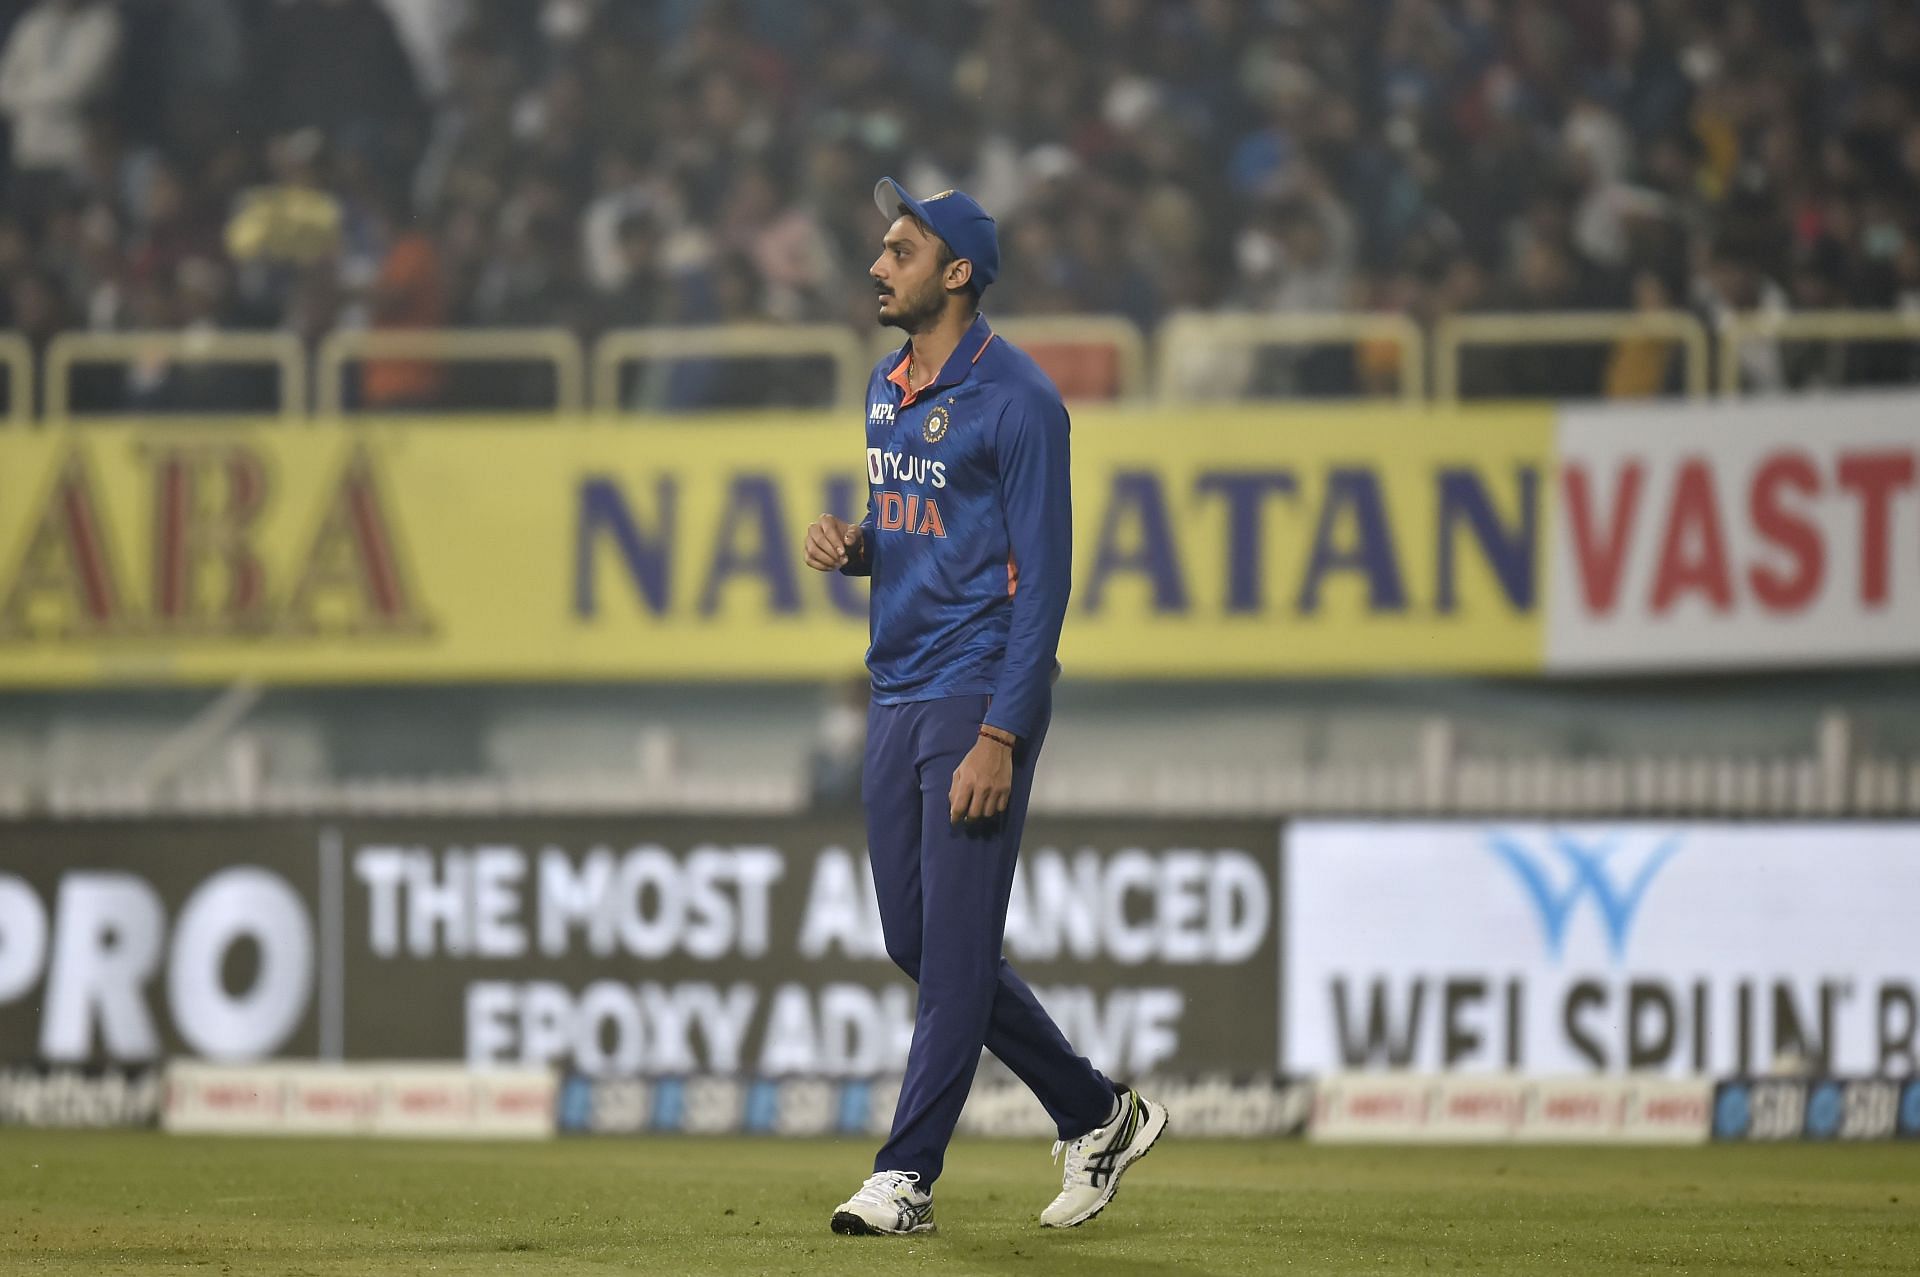 Axar Patel was the pick of the bowlers on Tuesday.